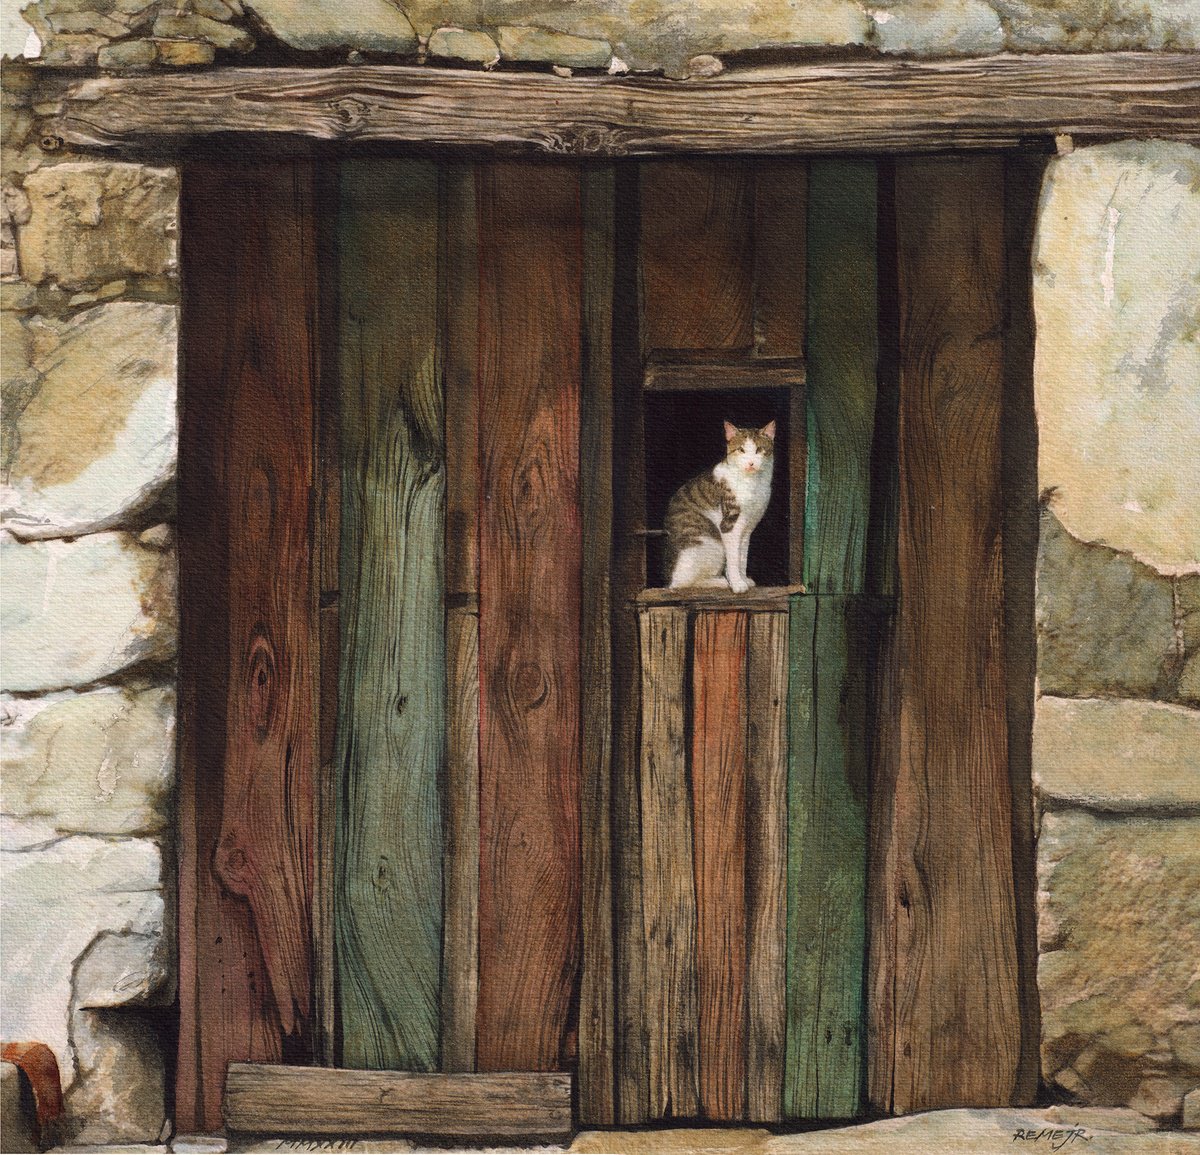 Village wood door with a cat by REME Jr.